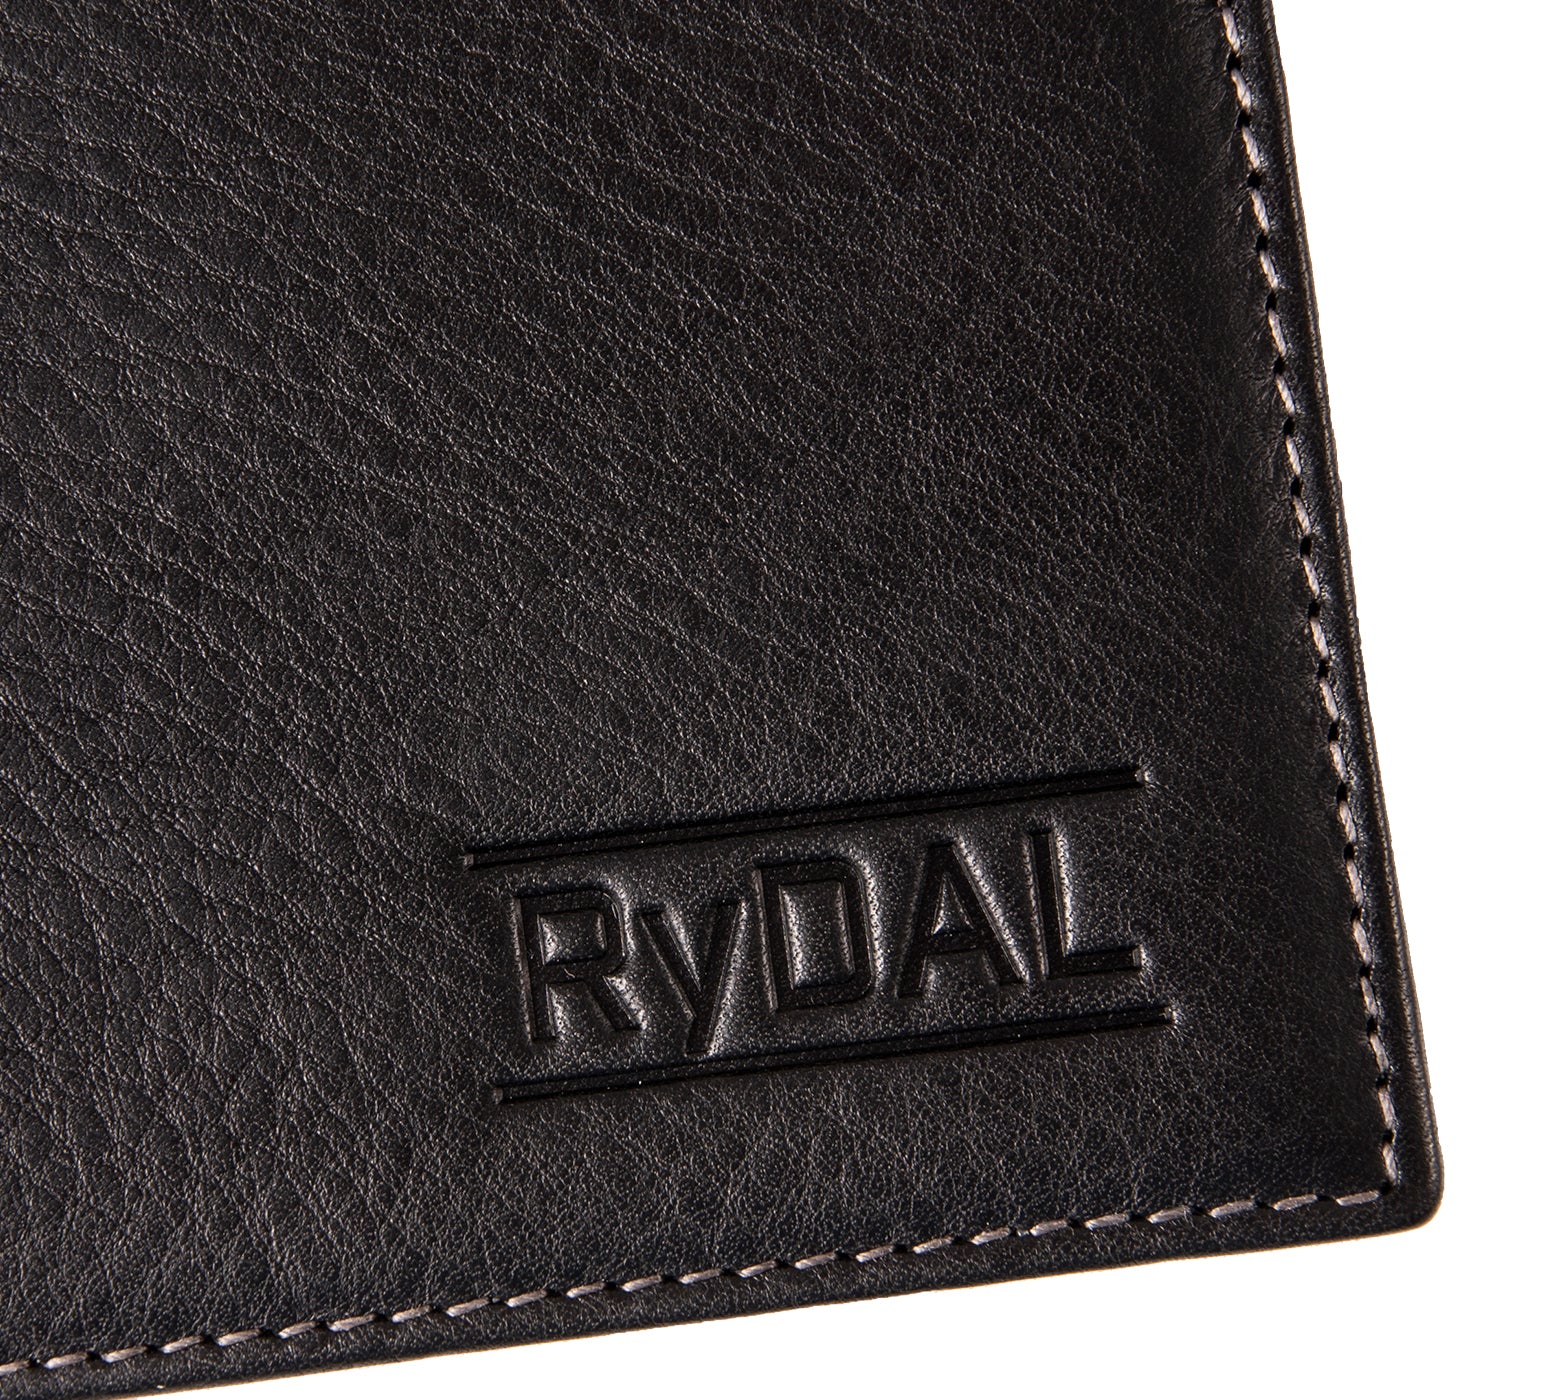 Mens Leather Wallet with Coin Pocket from Rydal in 'Black/Grey' showing close up of logo.